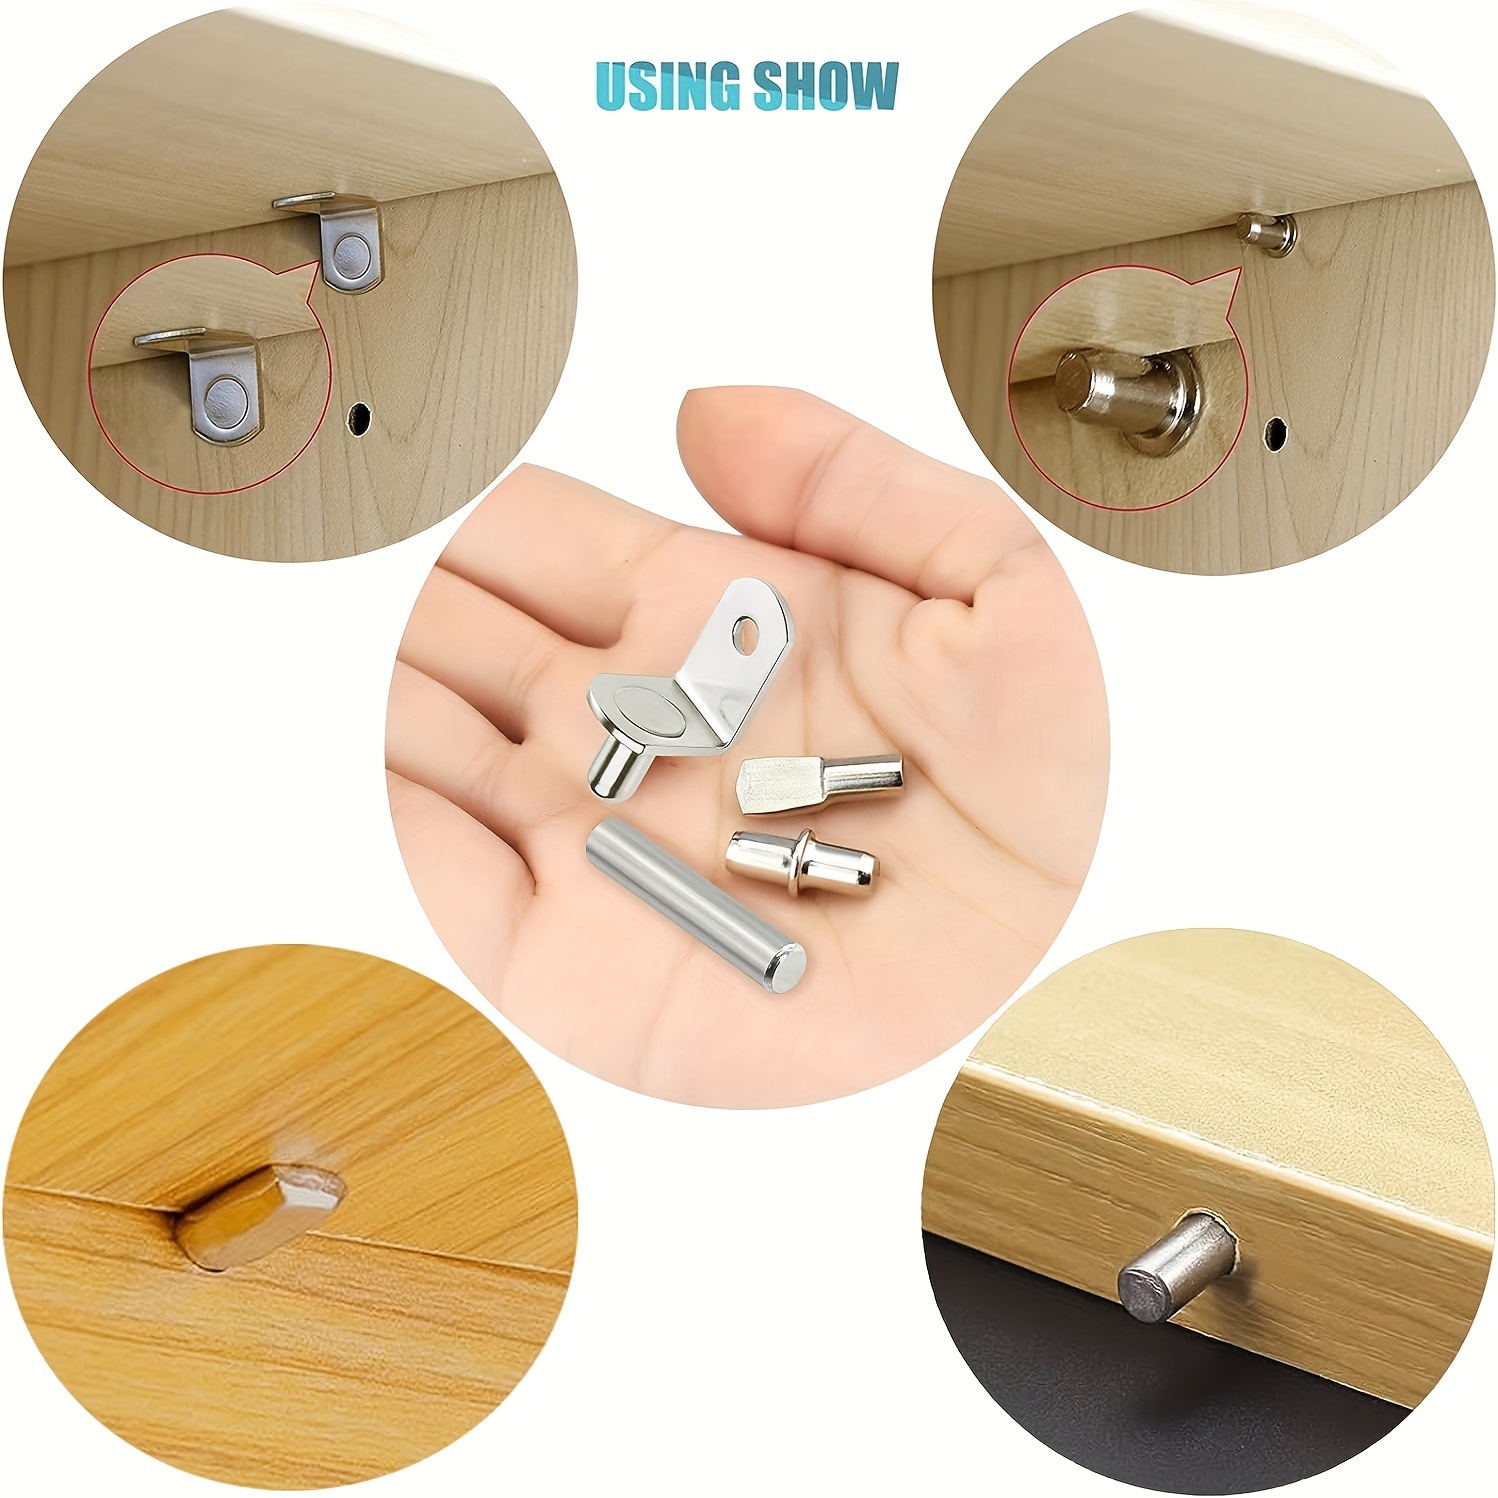 20pcs Cabinet Shelf Pegs, 5mm / 0.2in Shelf Bracket Pegs Metal Cabinet  Shelf Pins Support L-Shaped Furniture Hole Pins for Shelves Kitchen Cabinet